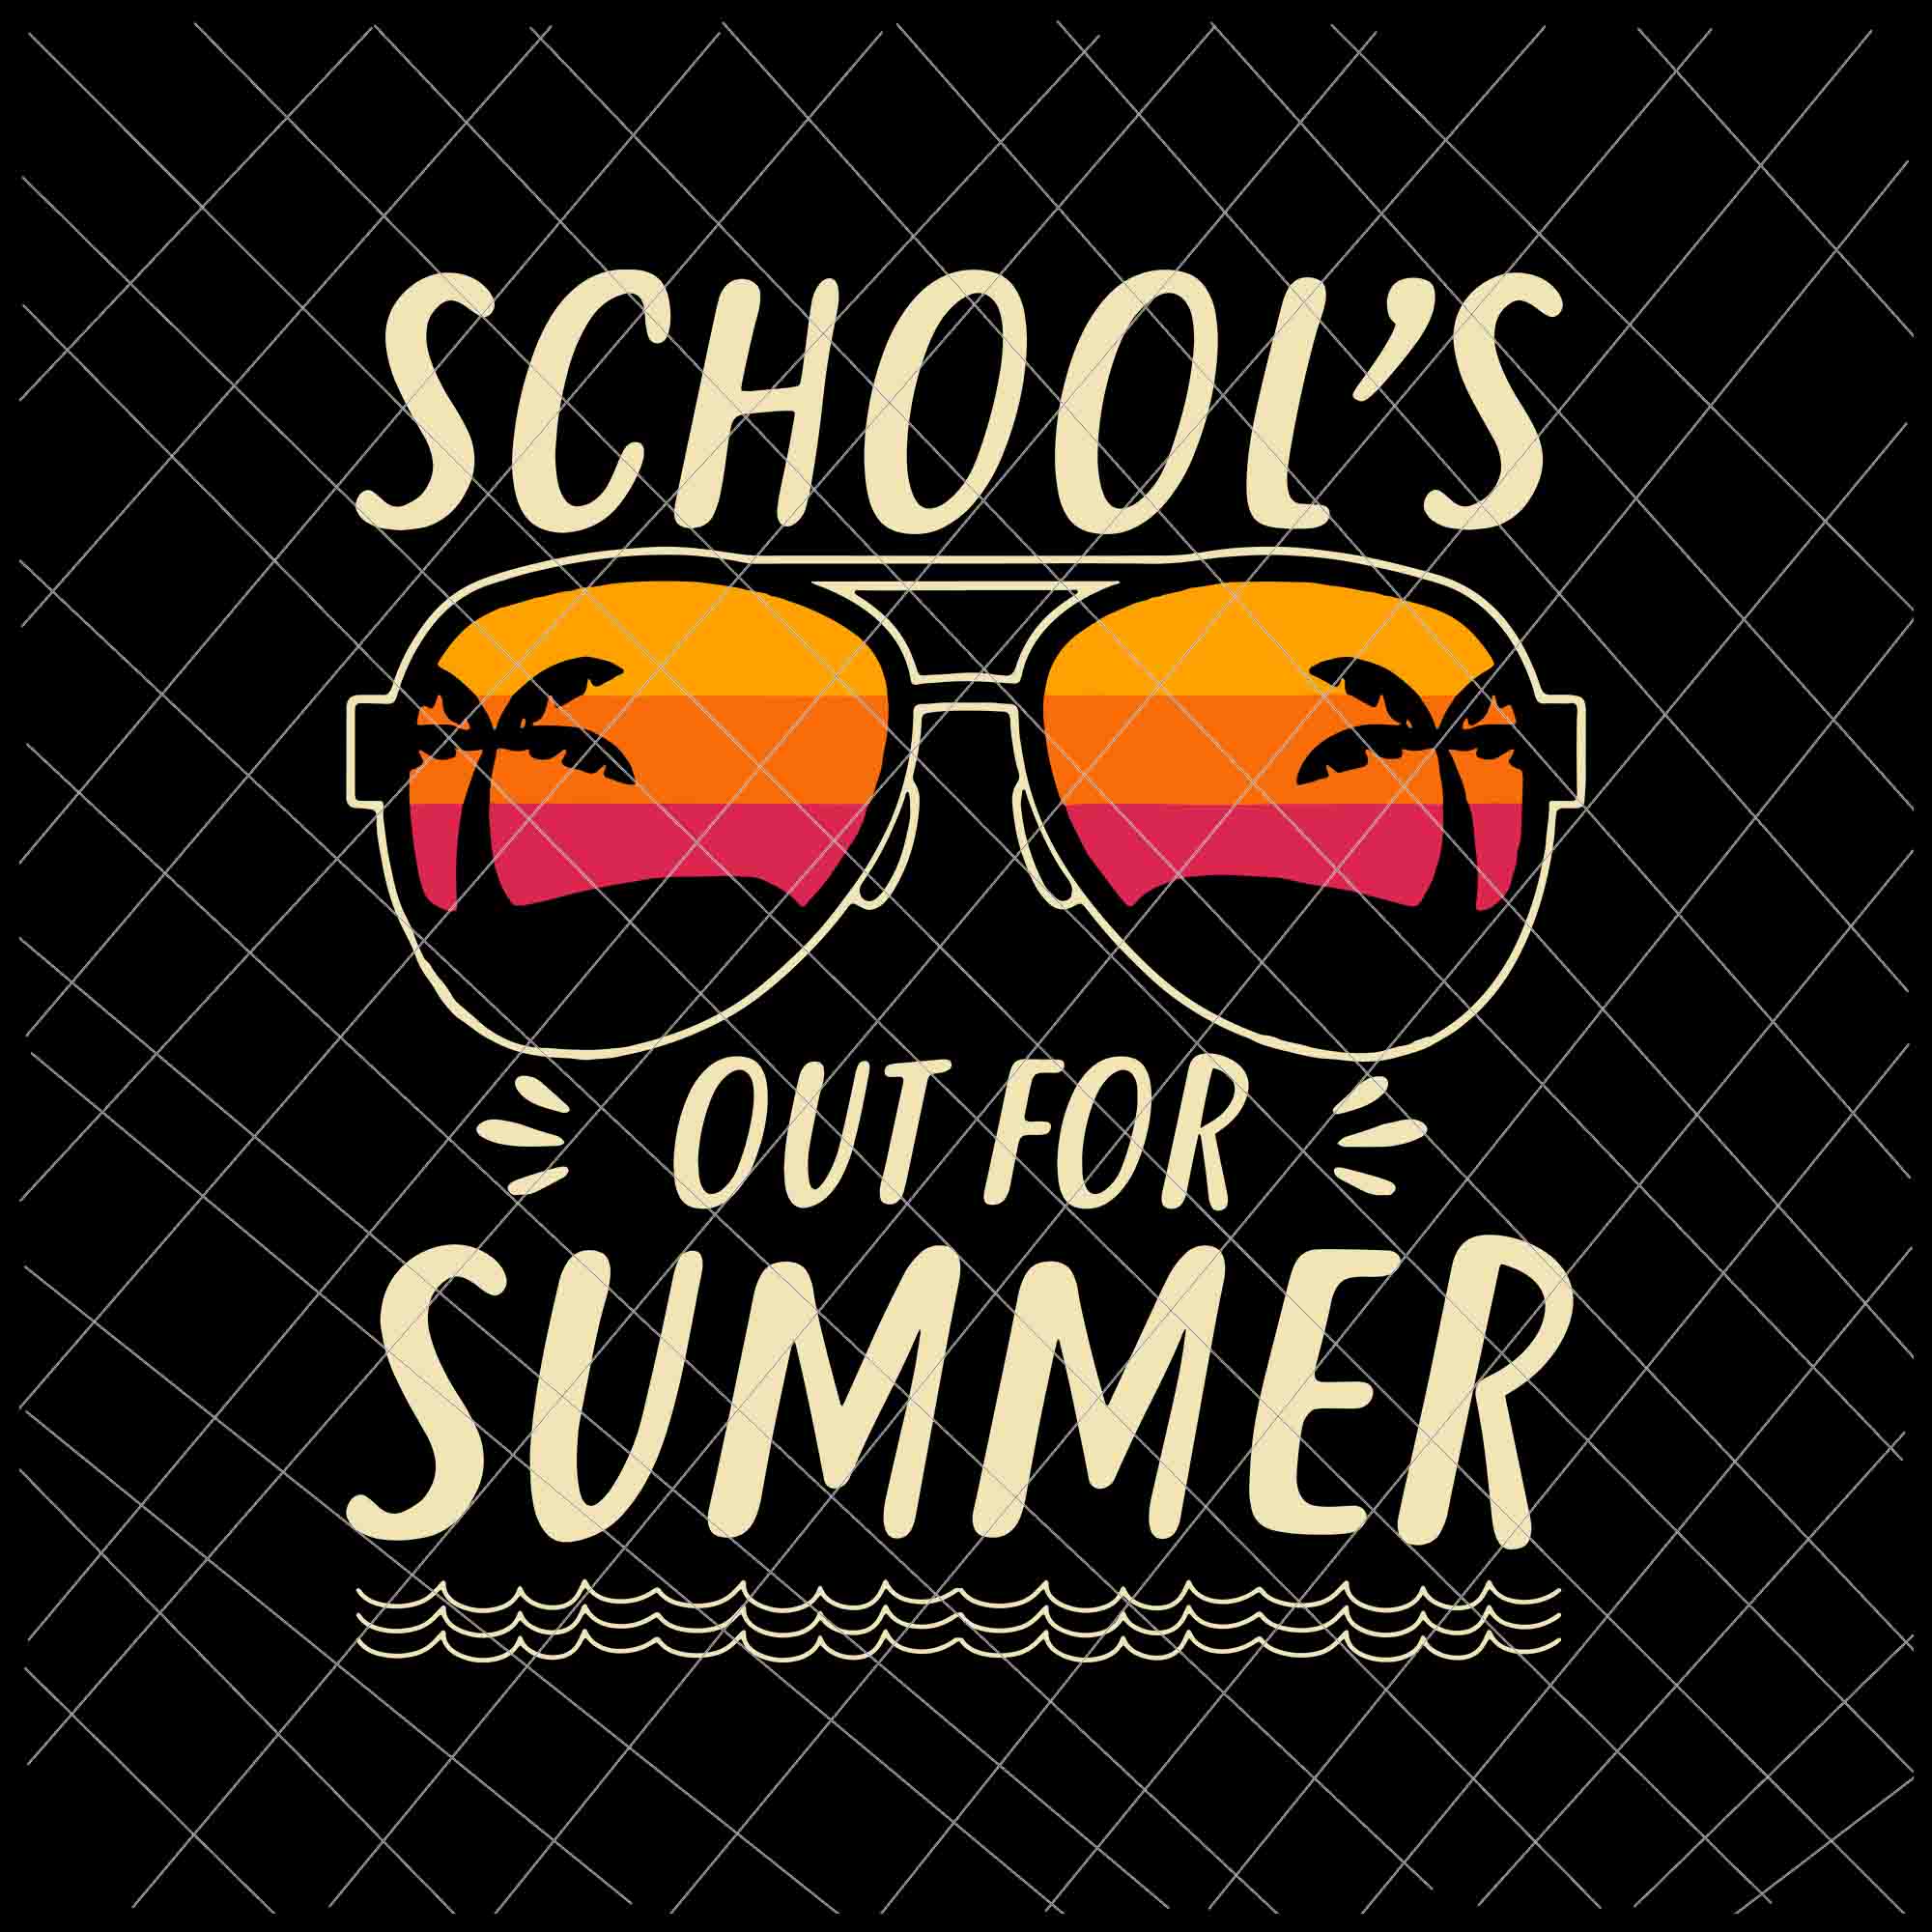 Download Schools Out For Summer Svg Retro Last Day Of School Svg Schools Out Buydesigntshirt